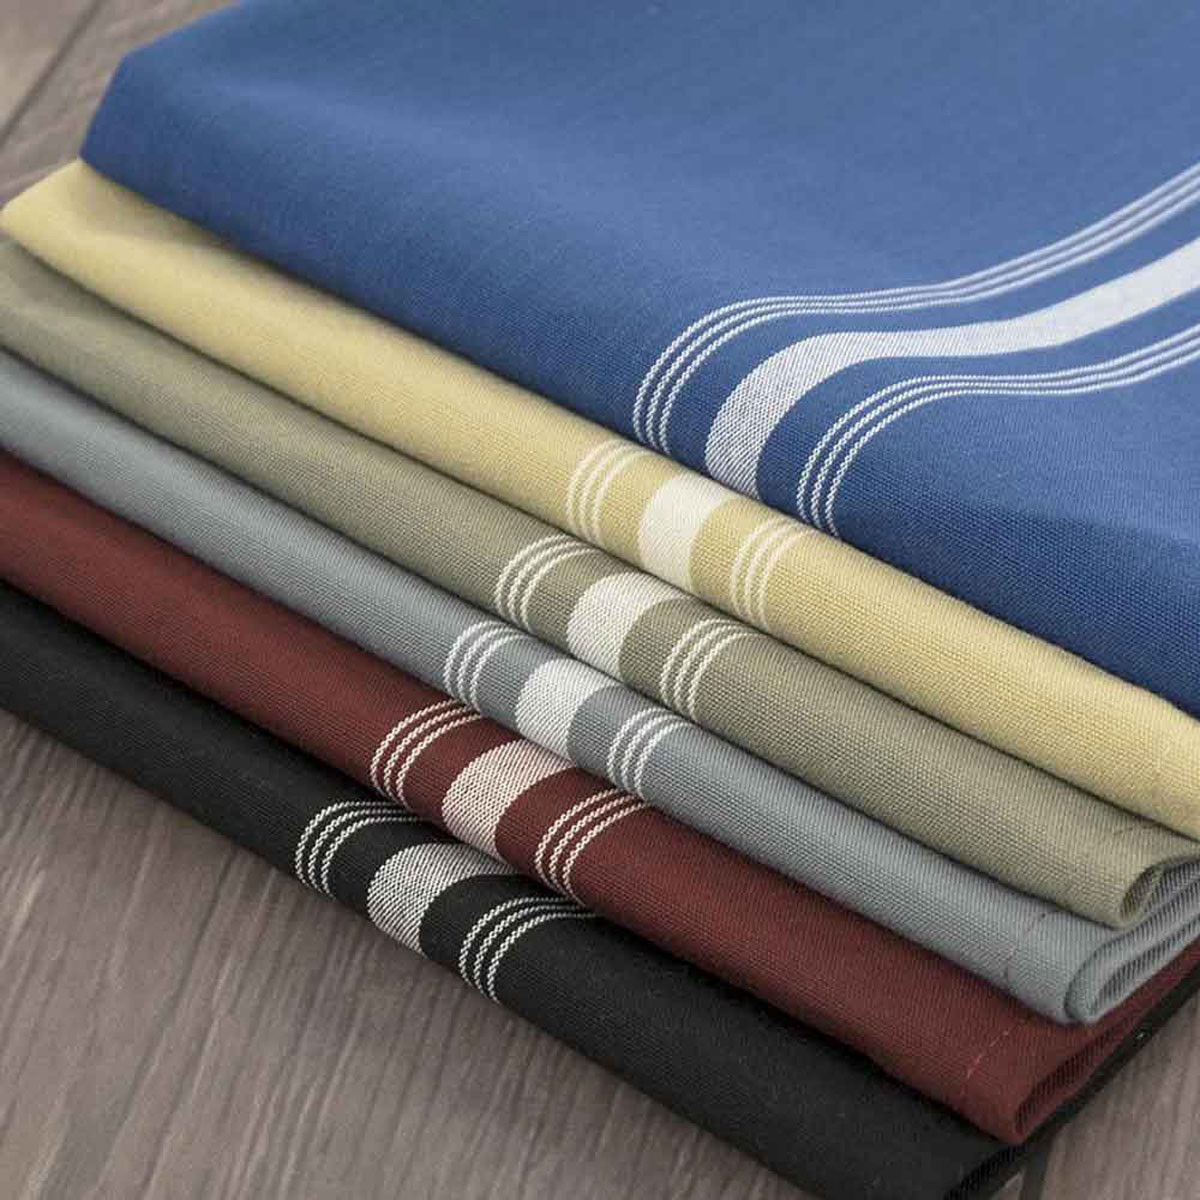 What are the key features of the Premier Reverse Stripe Bistro napkins by Riegel Linen?